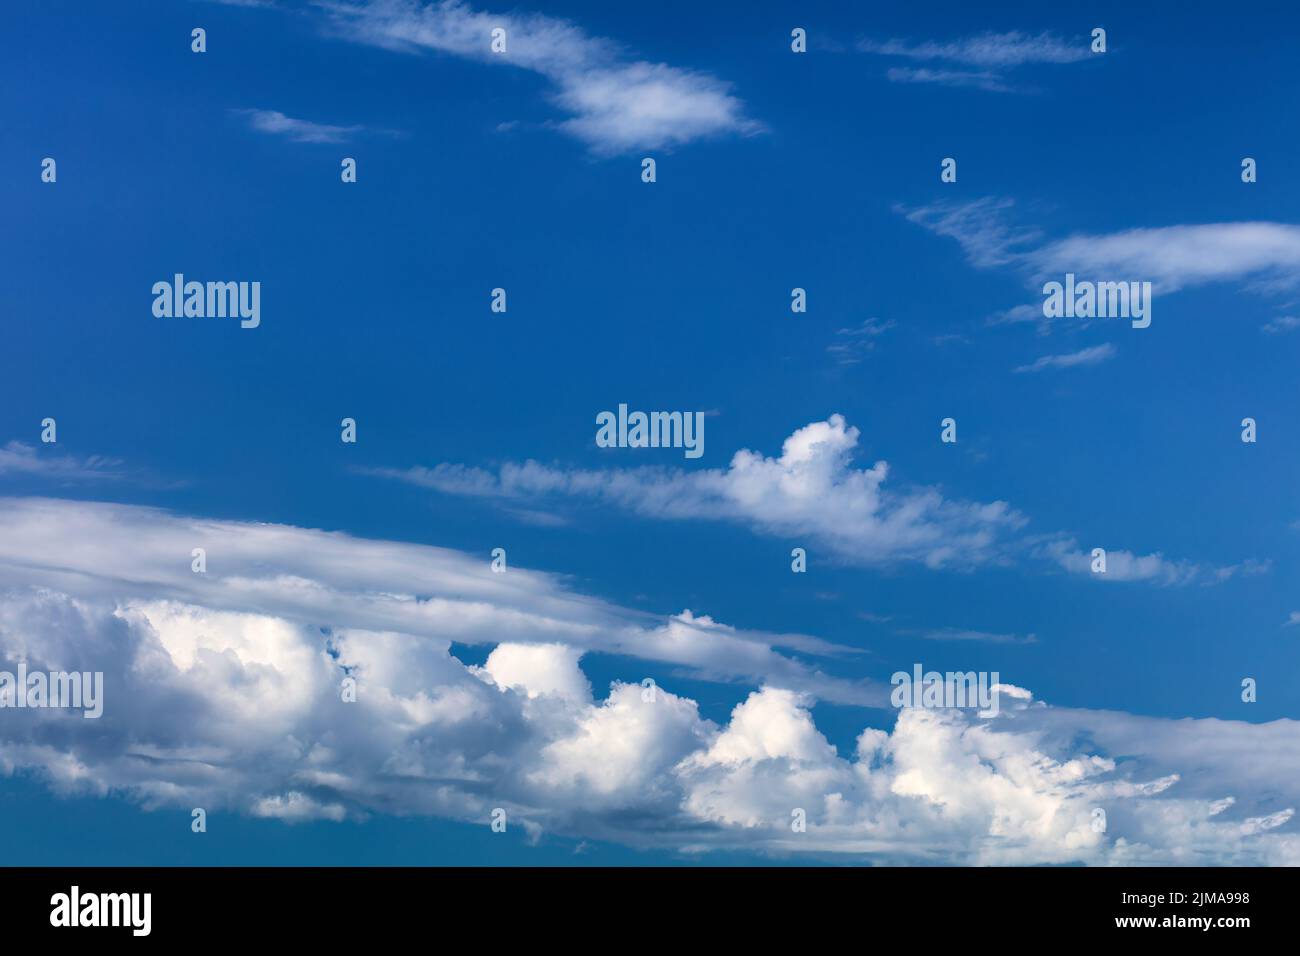 Sky background with dark blue skies and white clouds Stock Photo